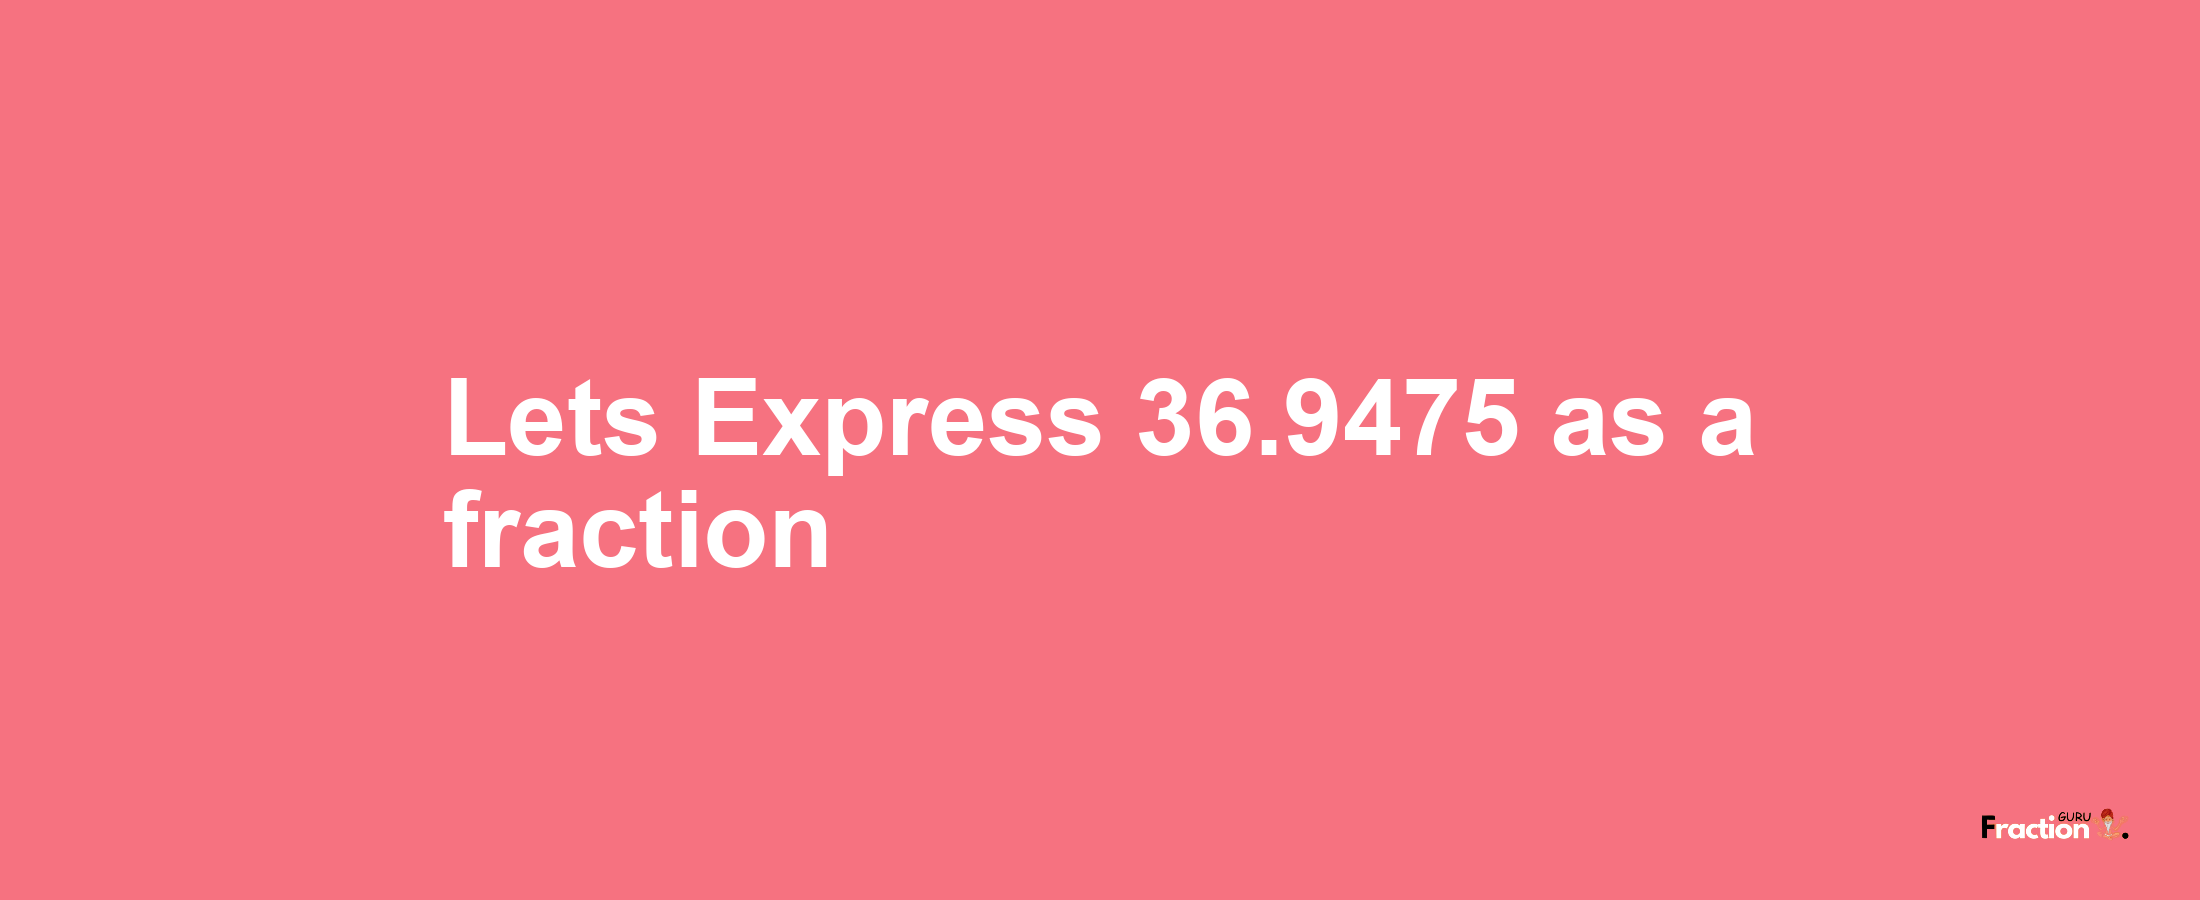 Lets Express 36.9475 as afraction